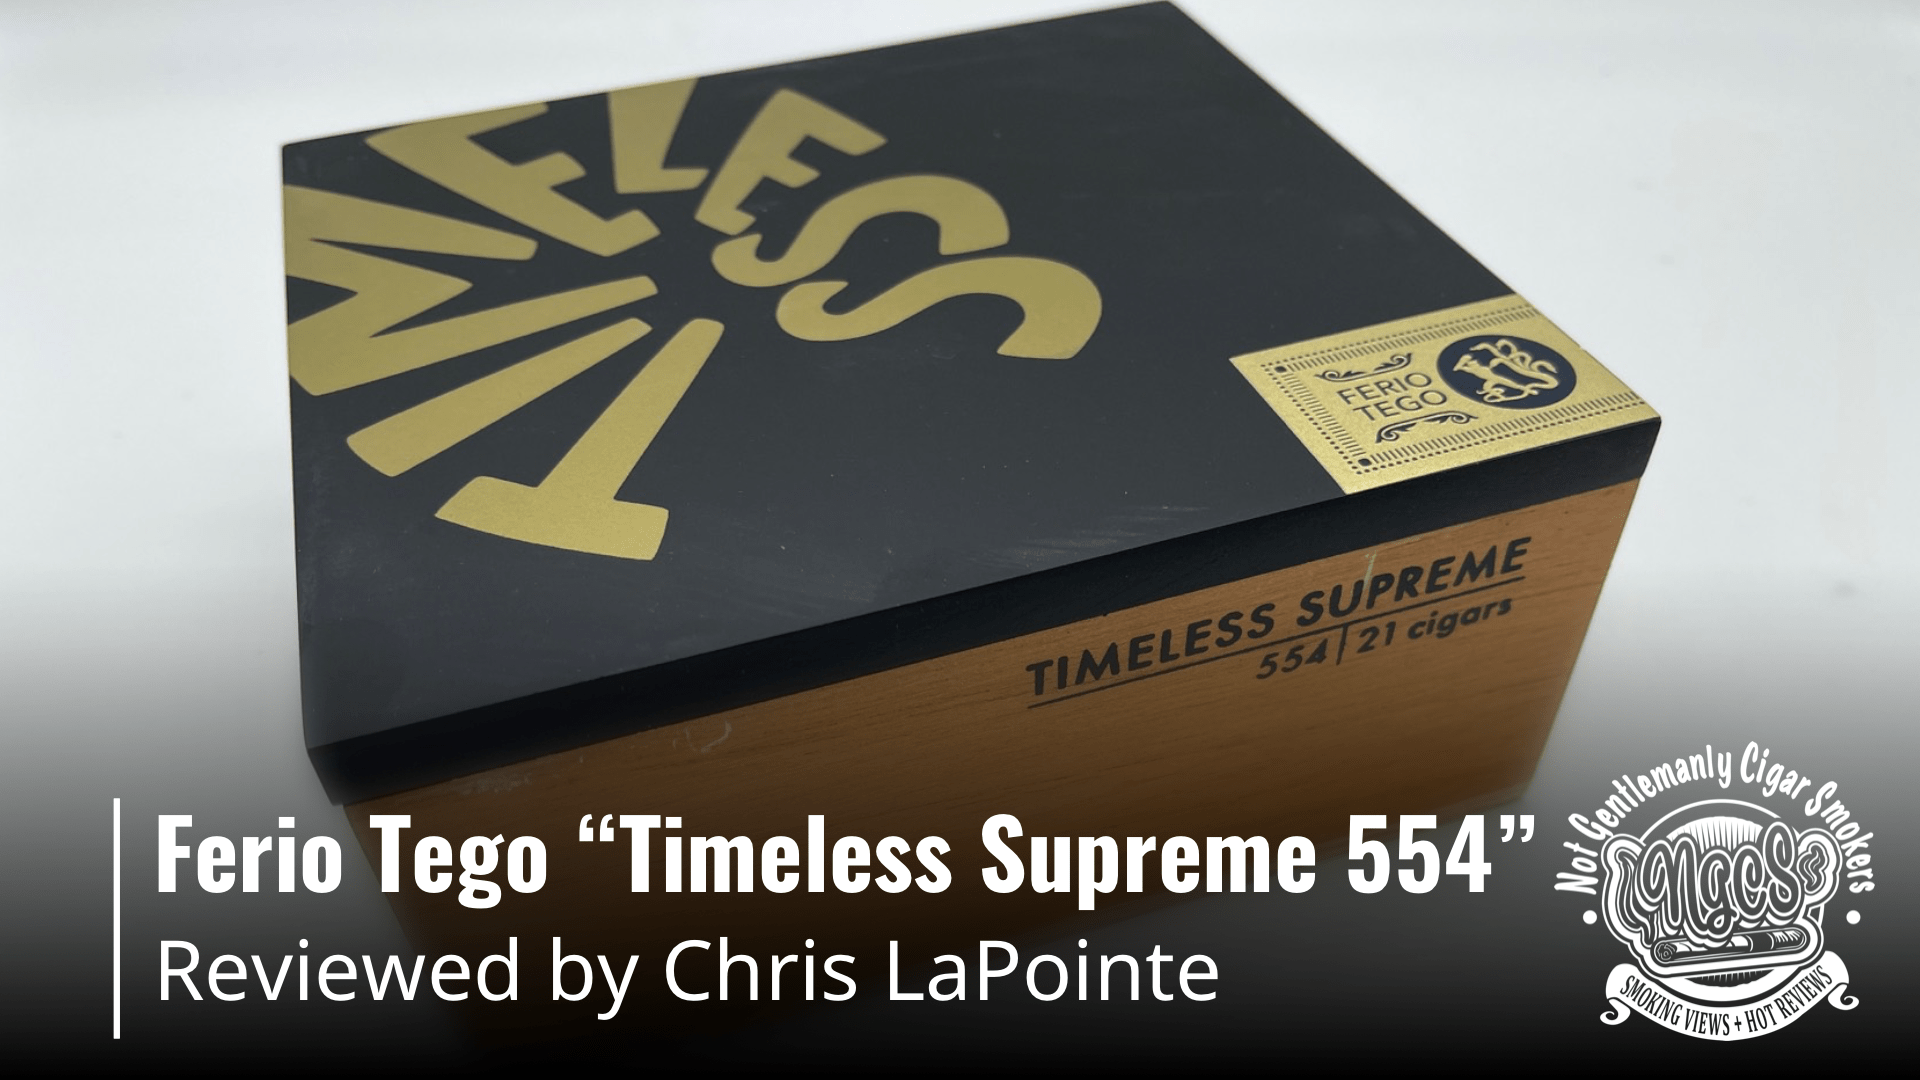 Ferio Tego “Timeless Supreme 554” Reviewed by Chris LaPointe